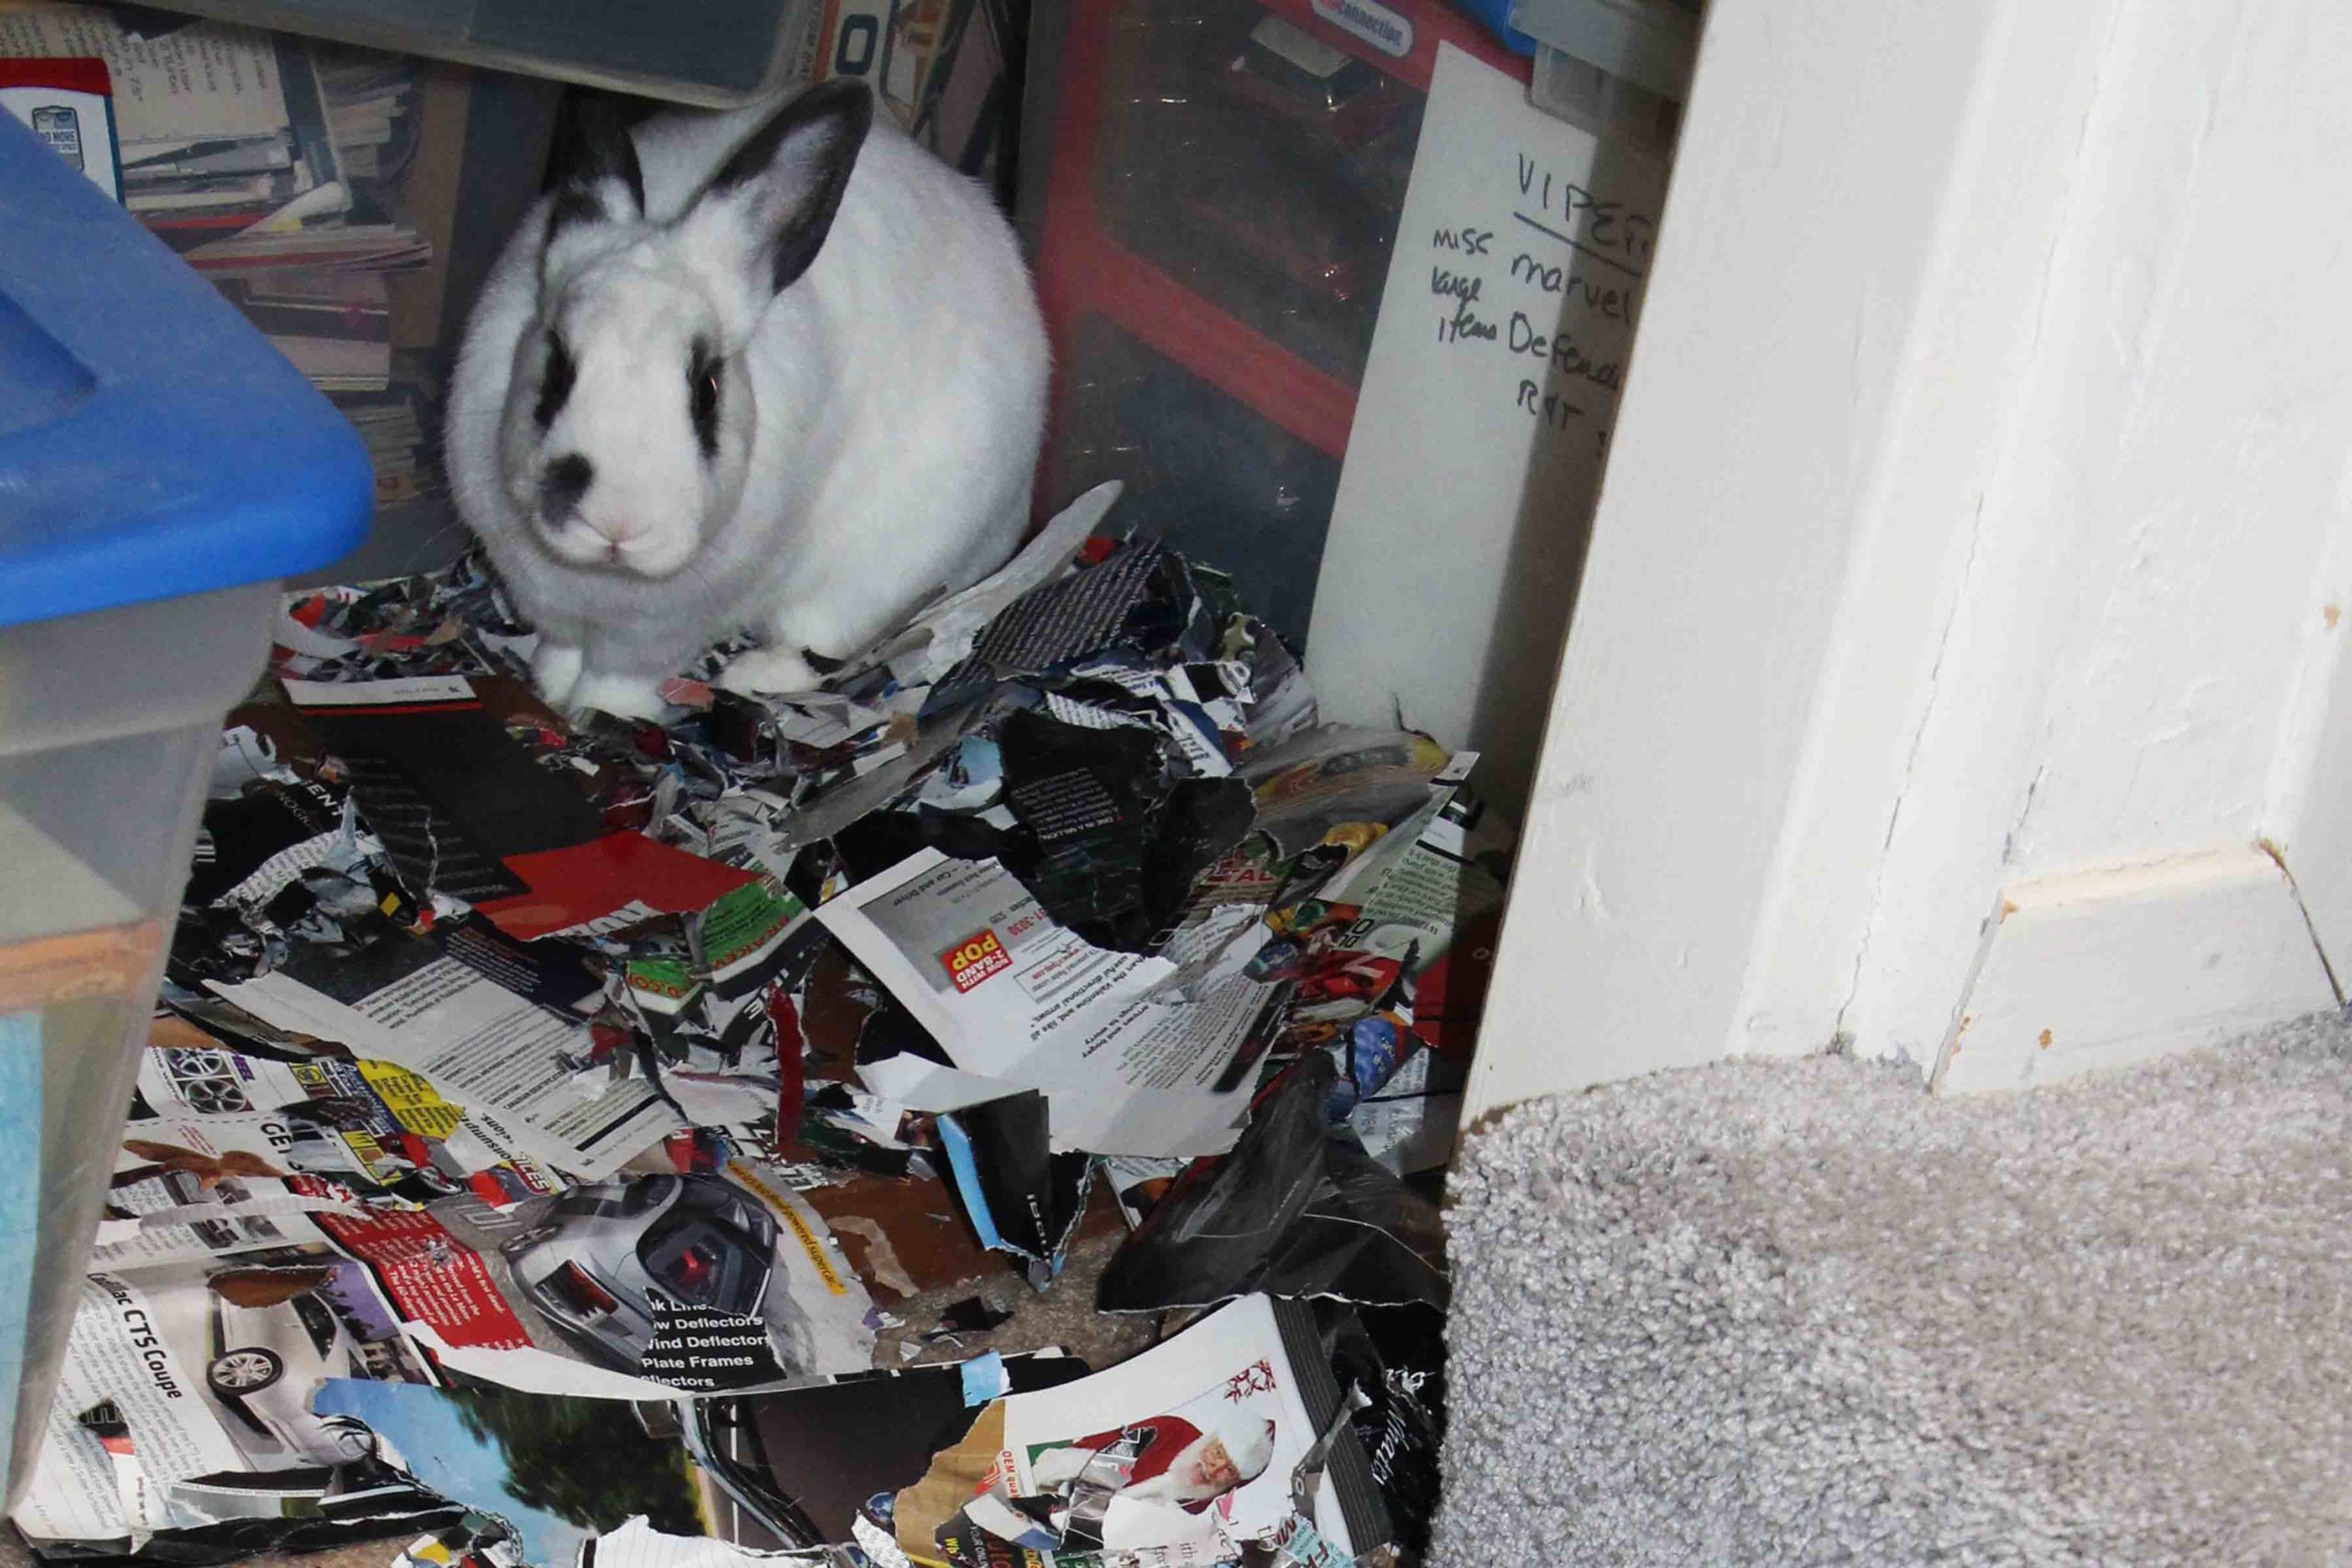 Bentley's hobby is digging through and ripping up magazines in his closet burrow.